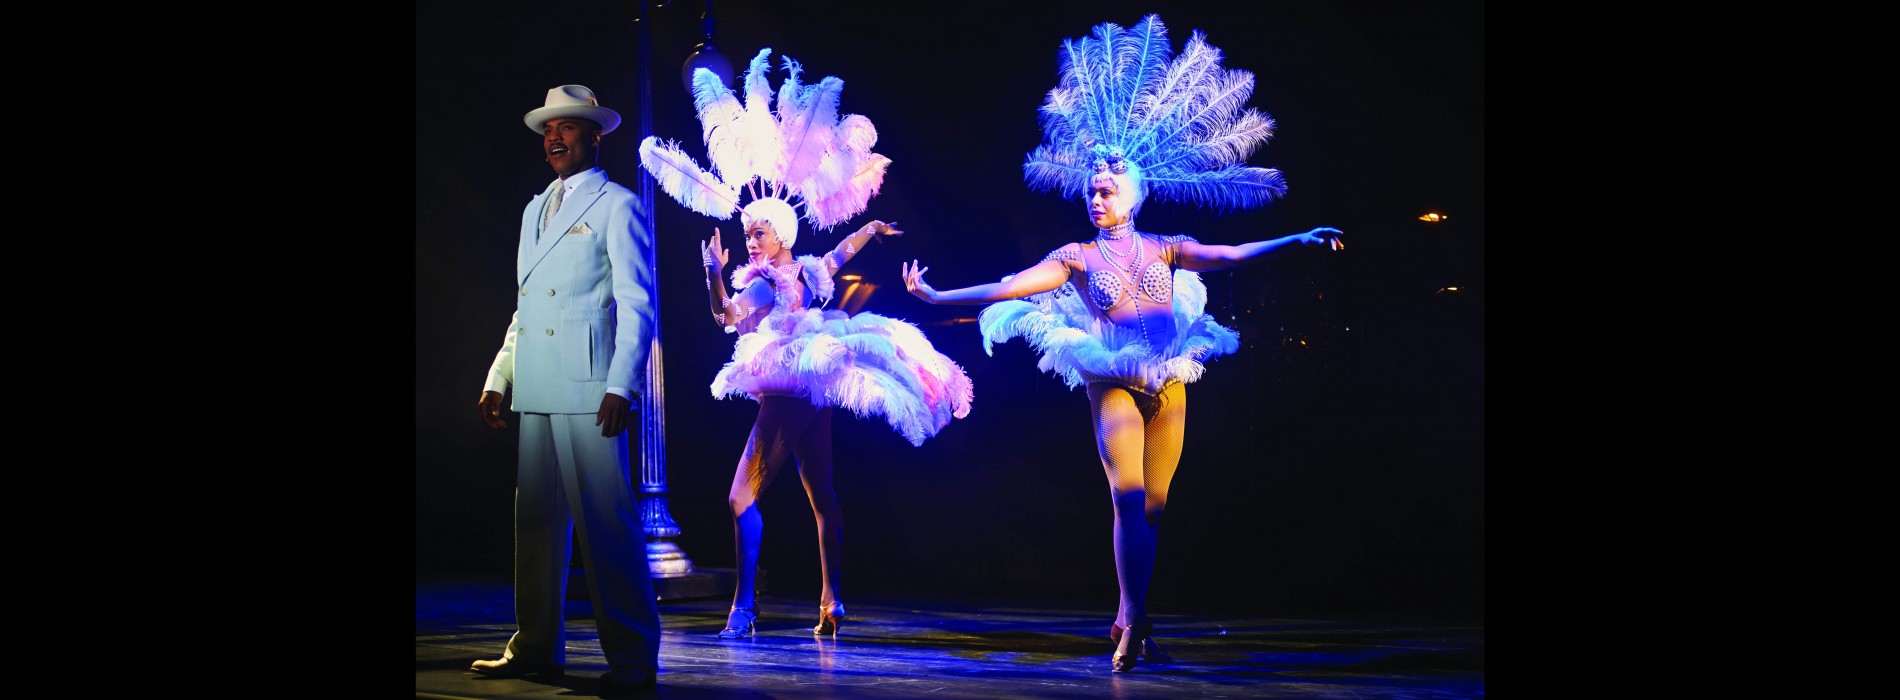 Norwegian Escape cruise lights up the stage with Broadway stars